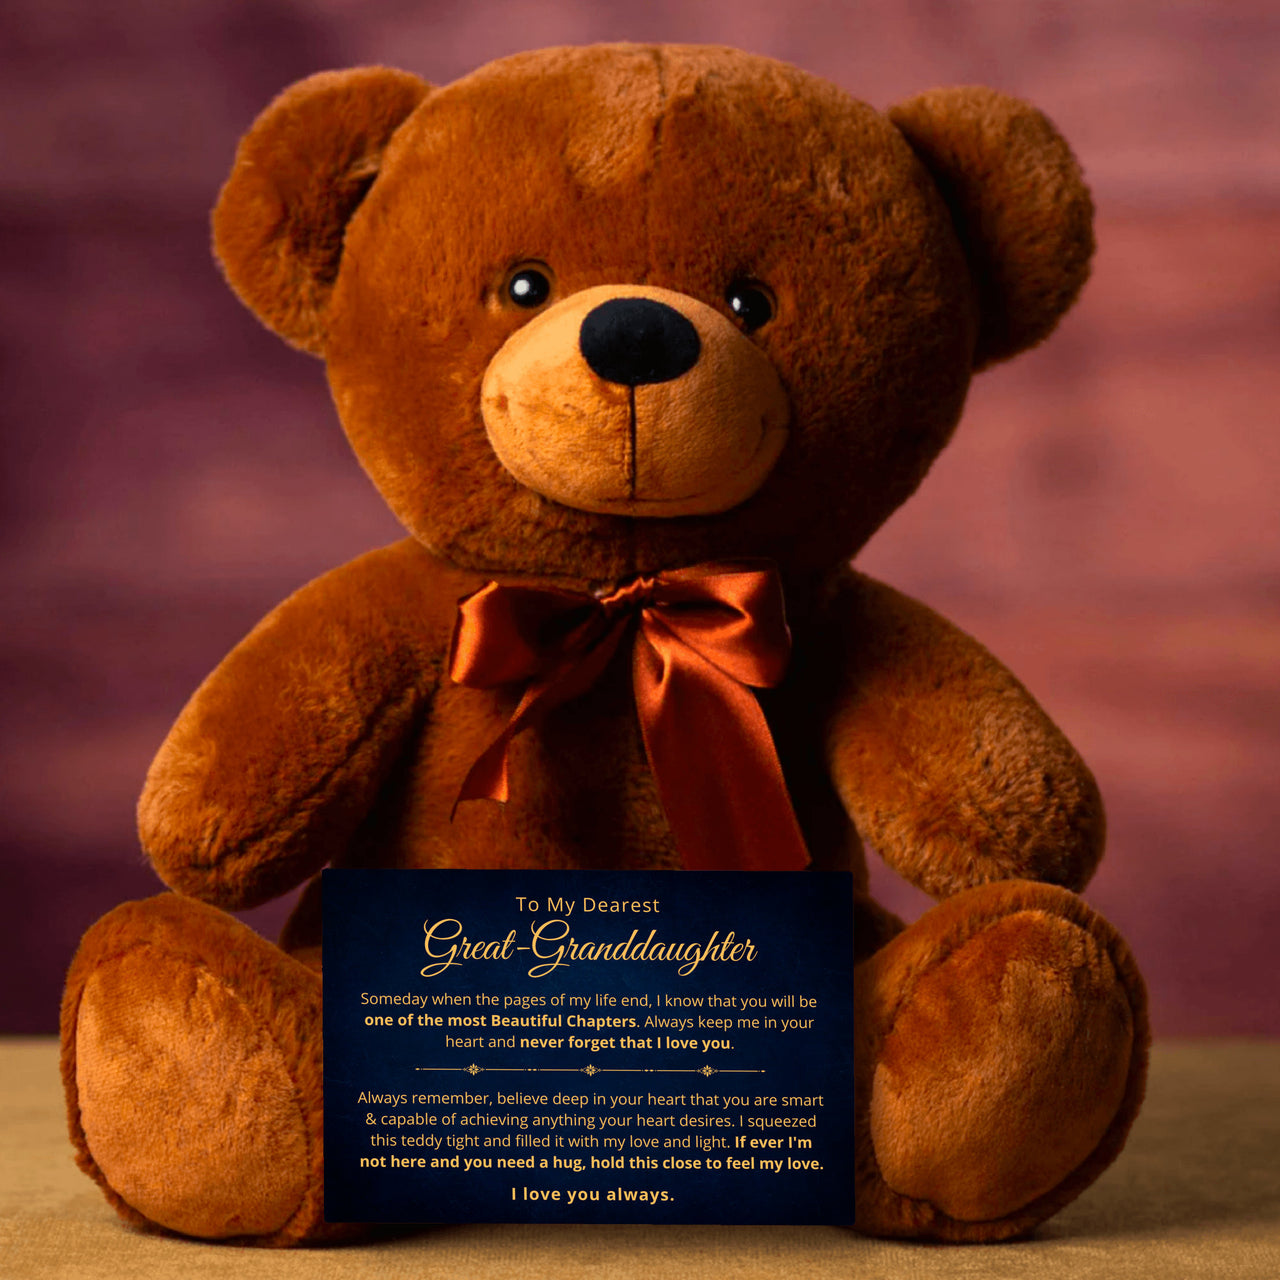 Great-Granddaughter, Never Forget - Teddy Bear with Canvas Message Card (G-GD79)